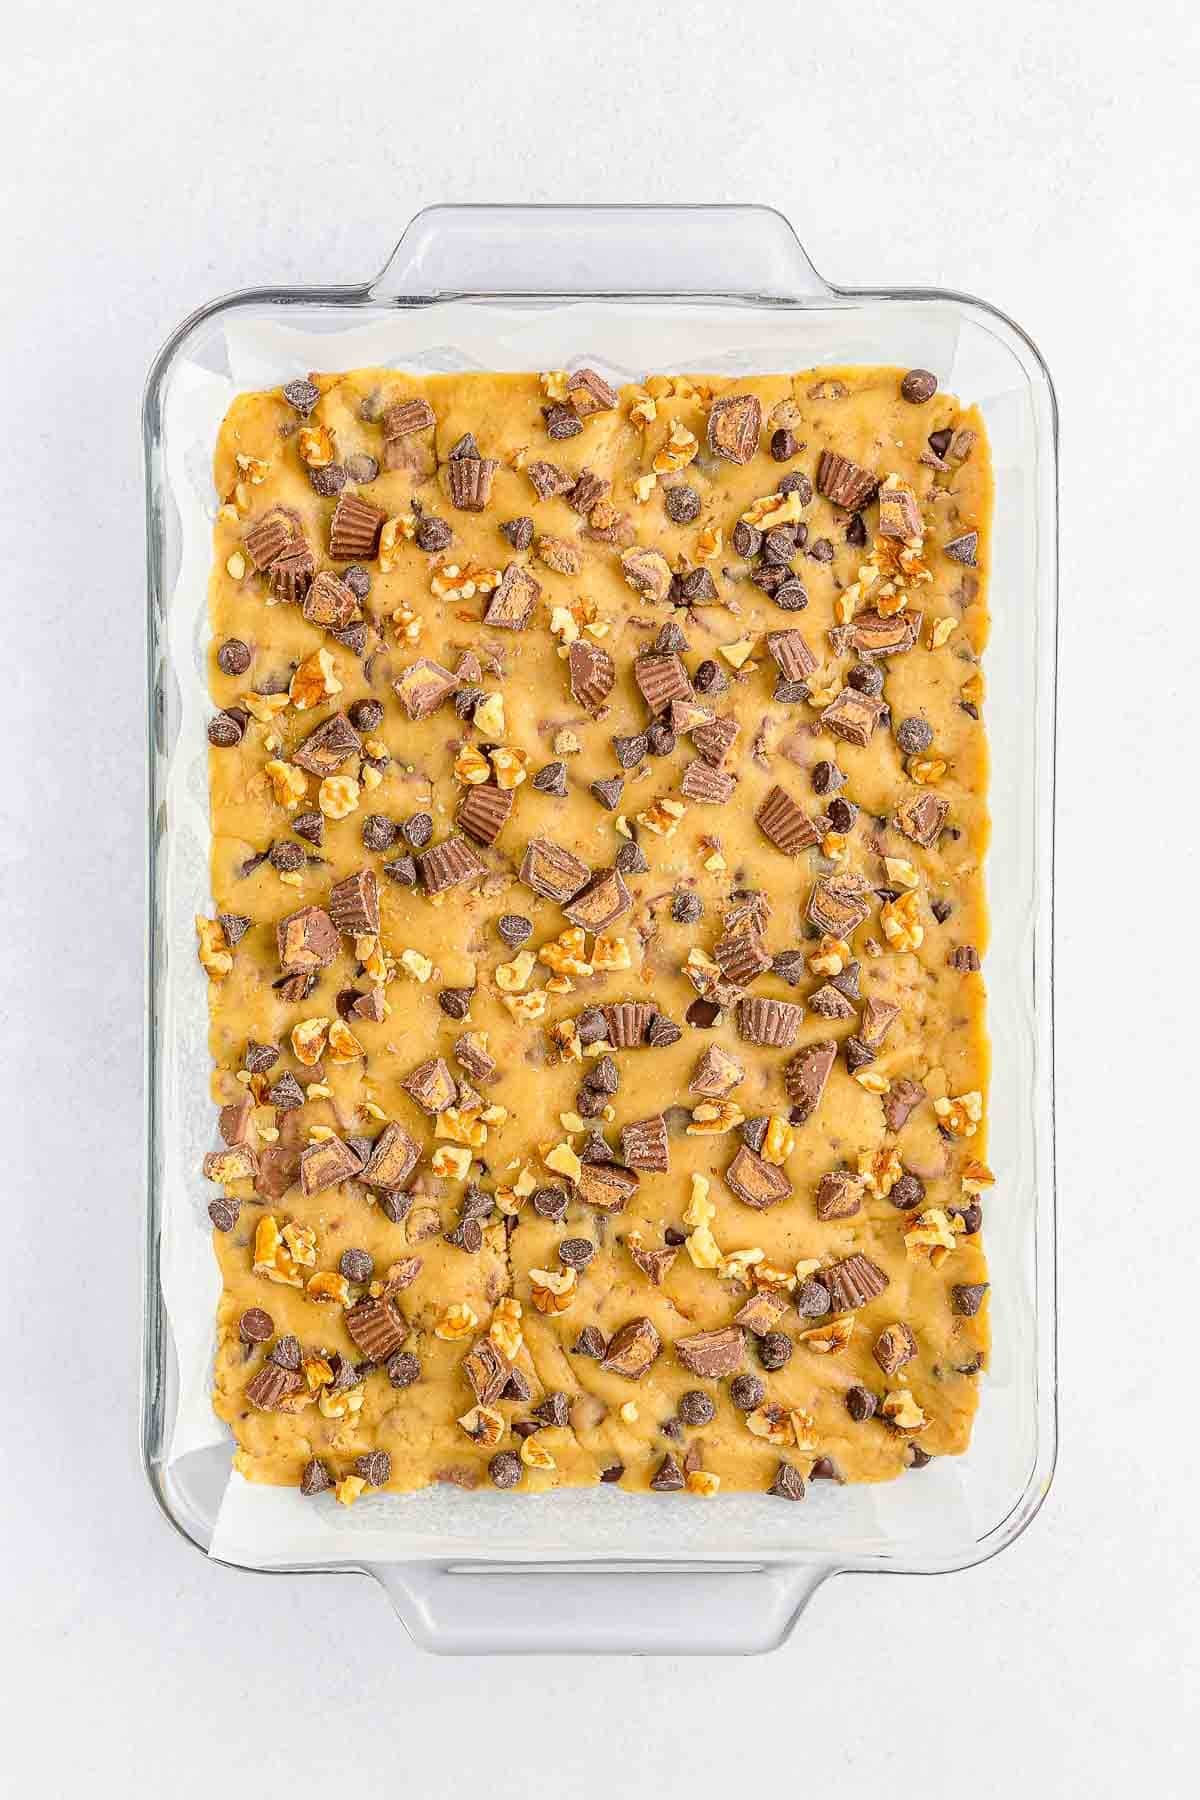 rectangle glass baking dish with cookie bar dough topped with peanut butter cups and chocolate chips.